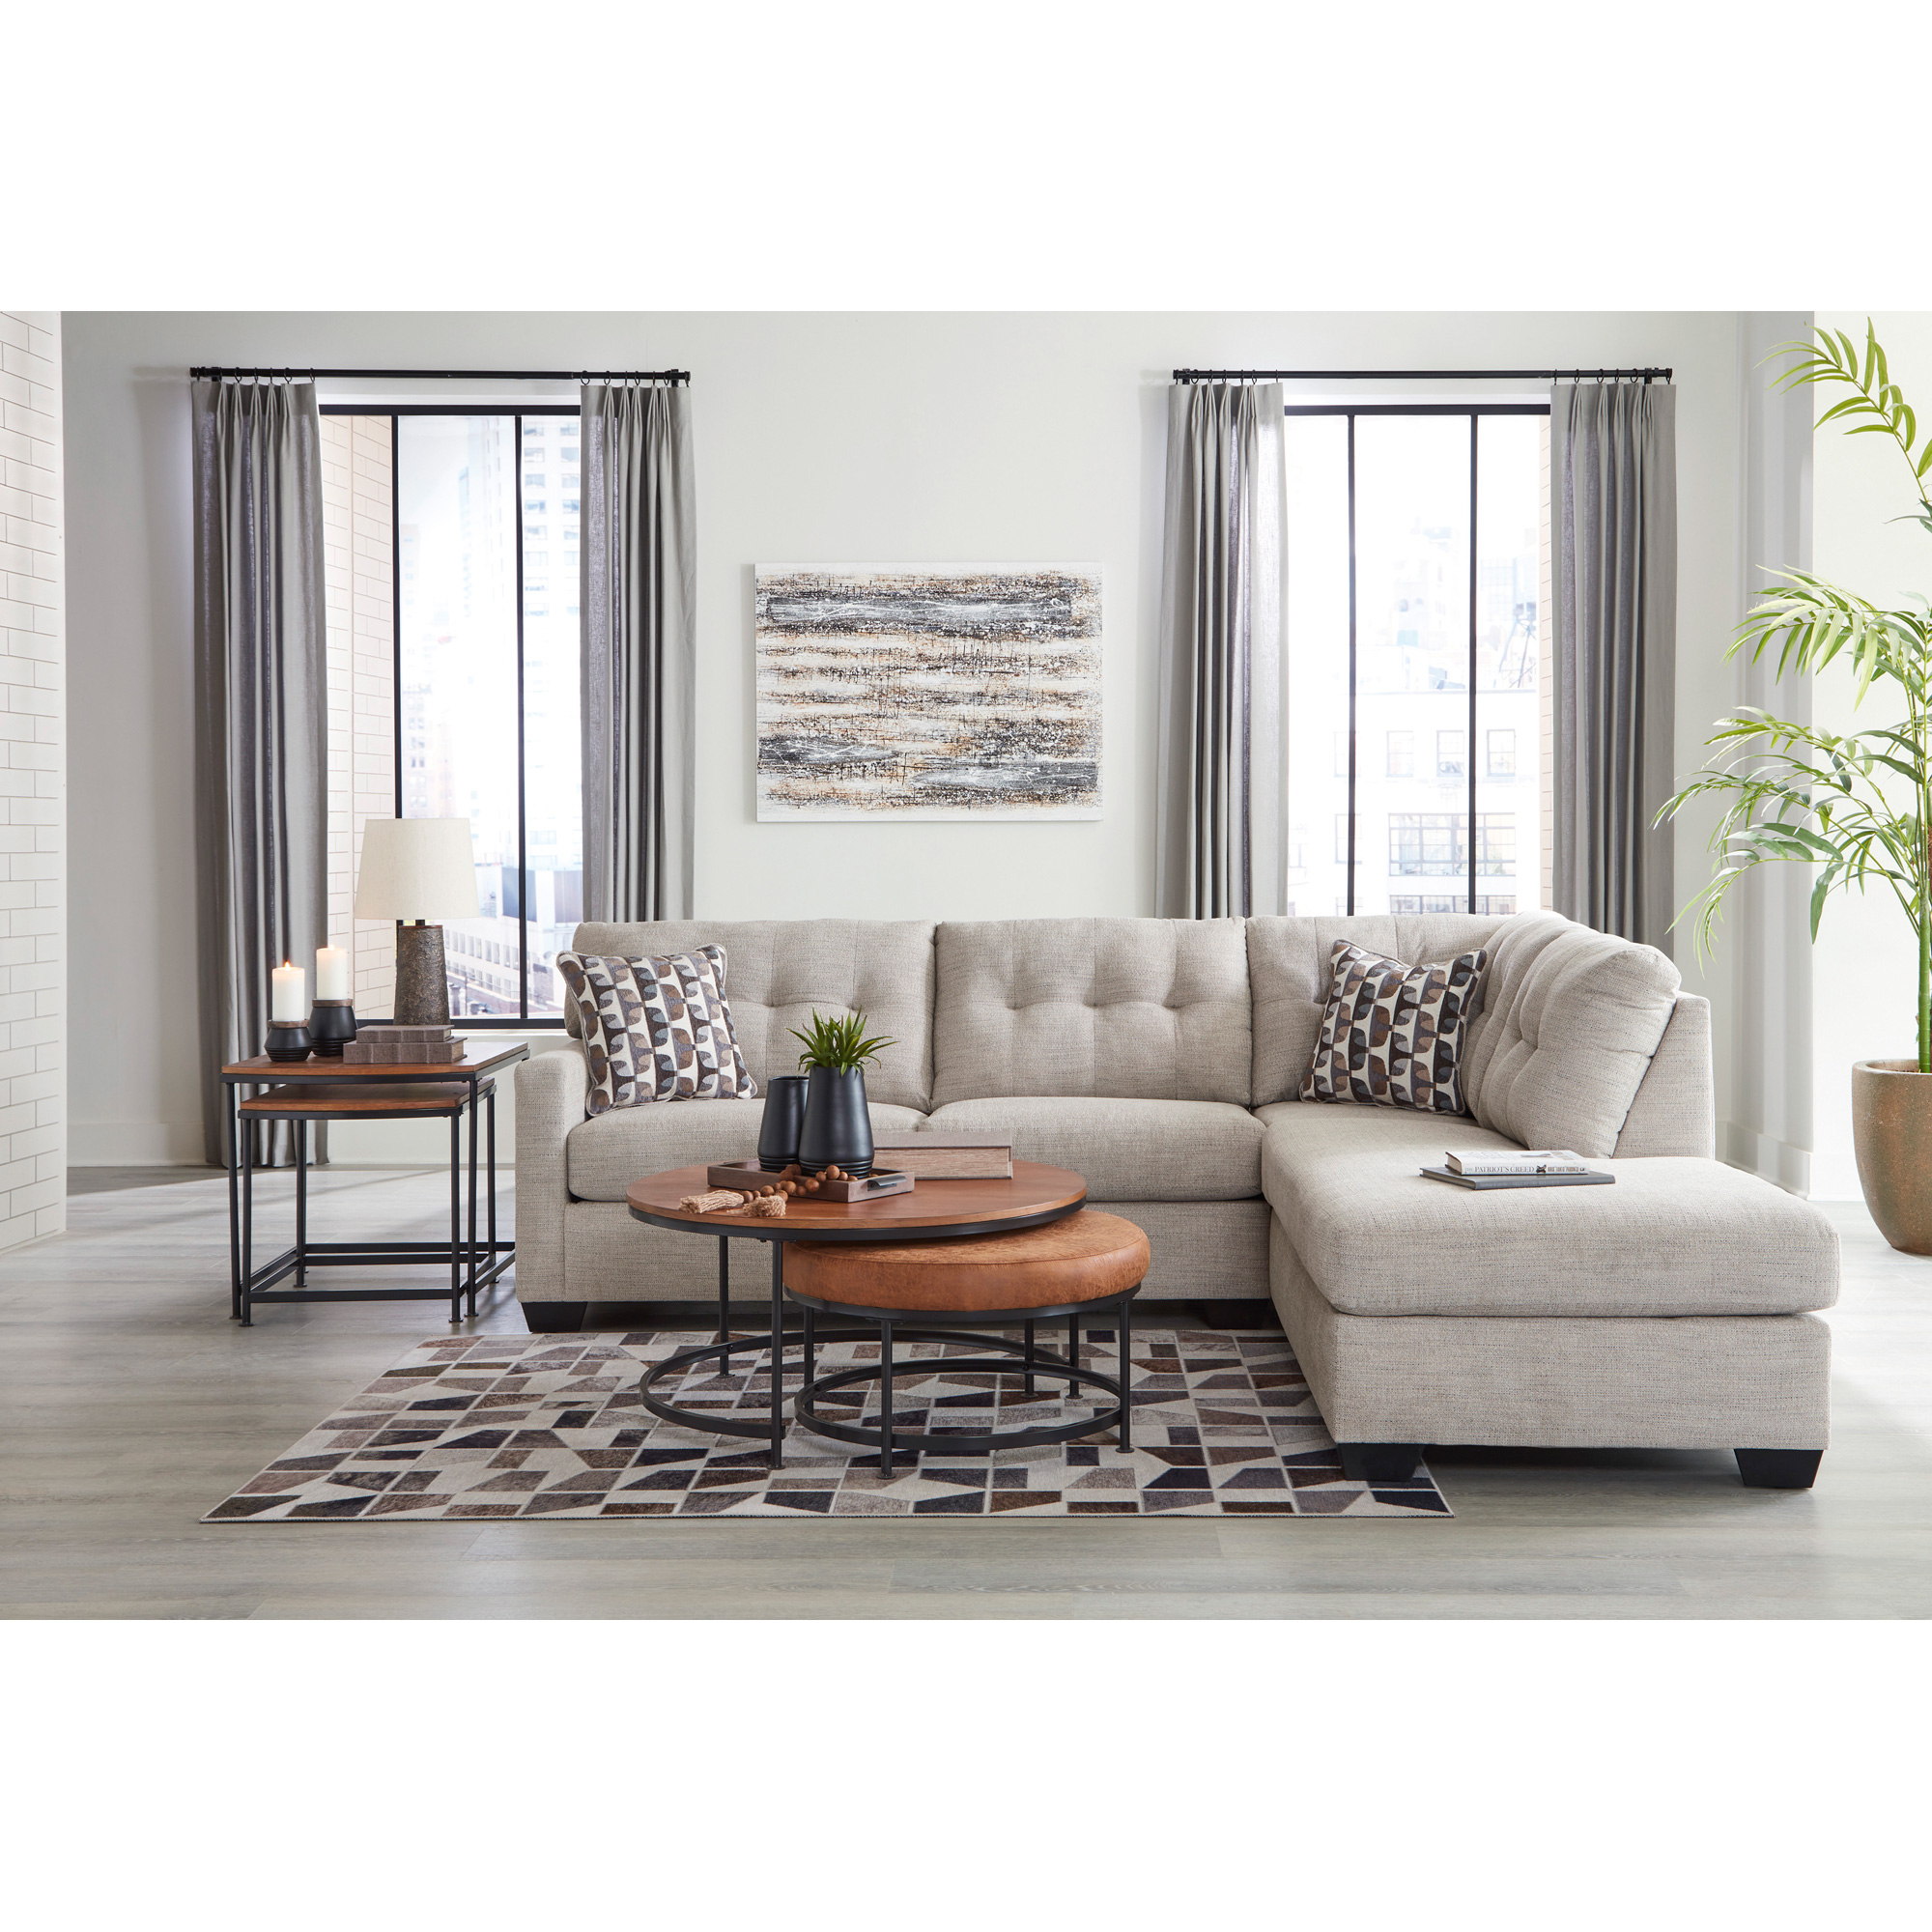 Mahoney Right Chaise Sectional Living